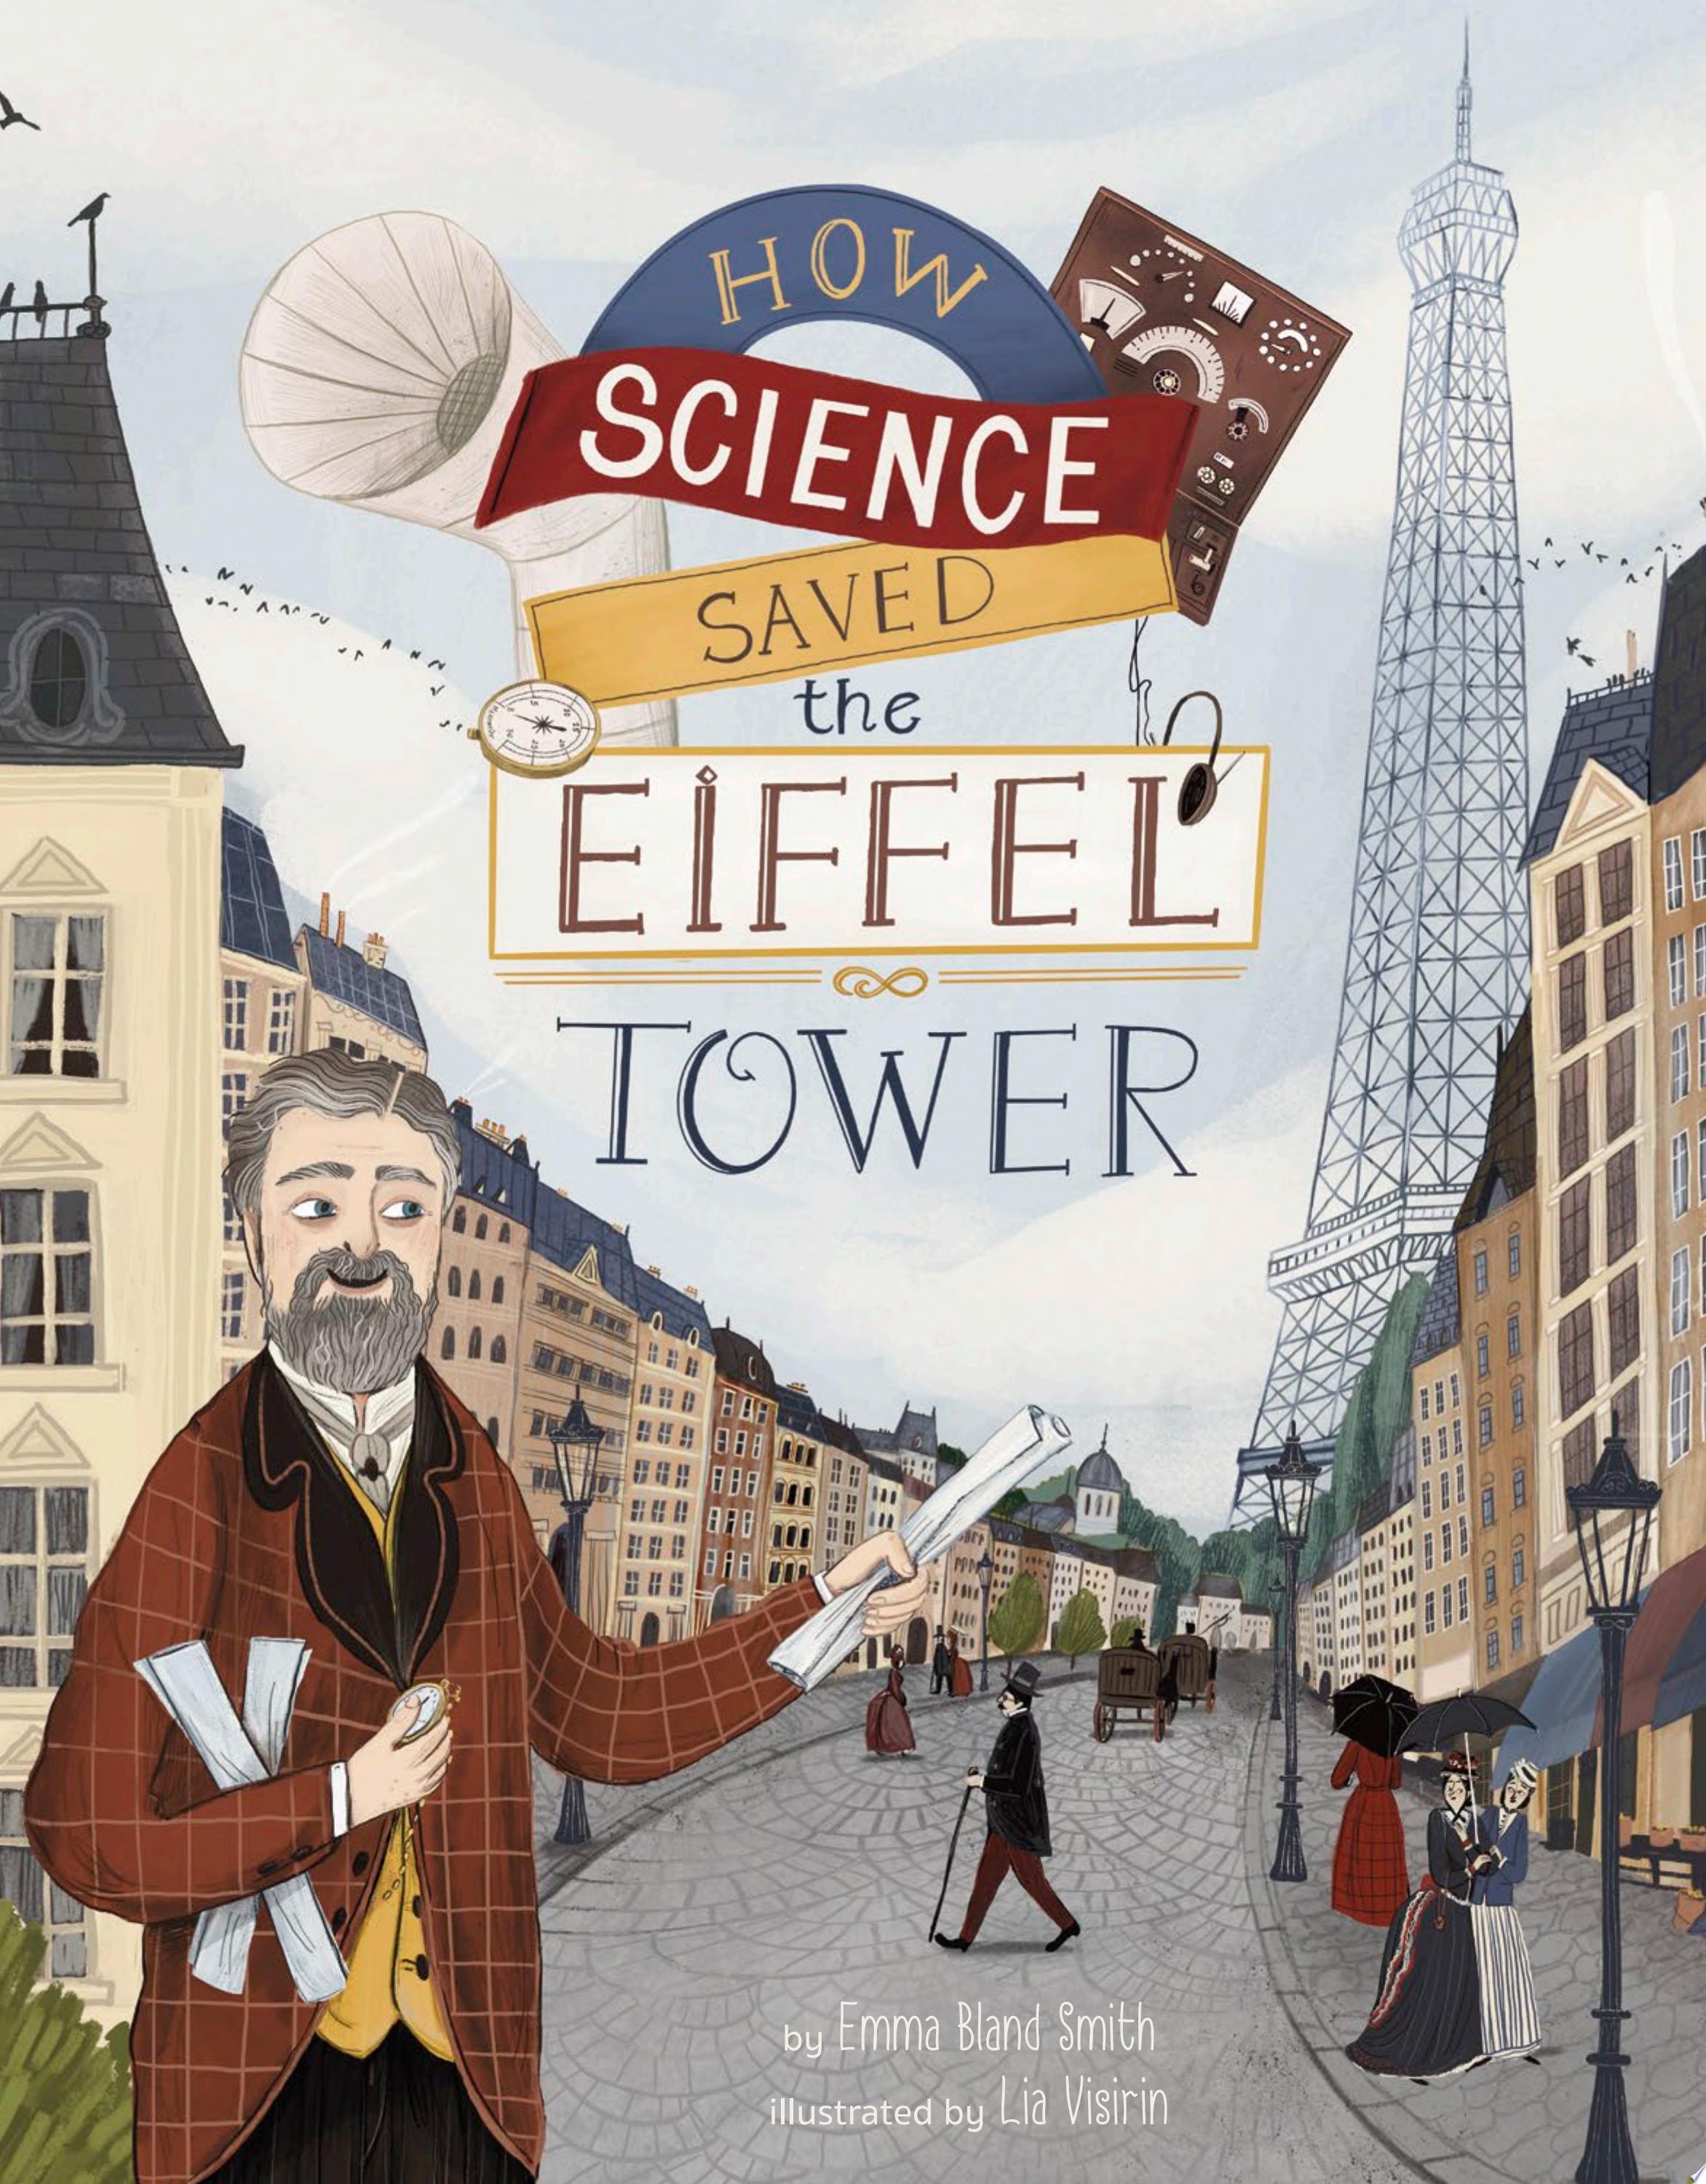 Image for "How Science Saved the Eiffel Tower"